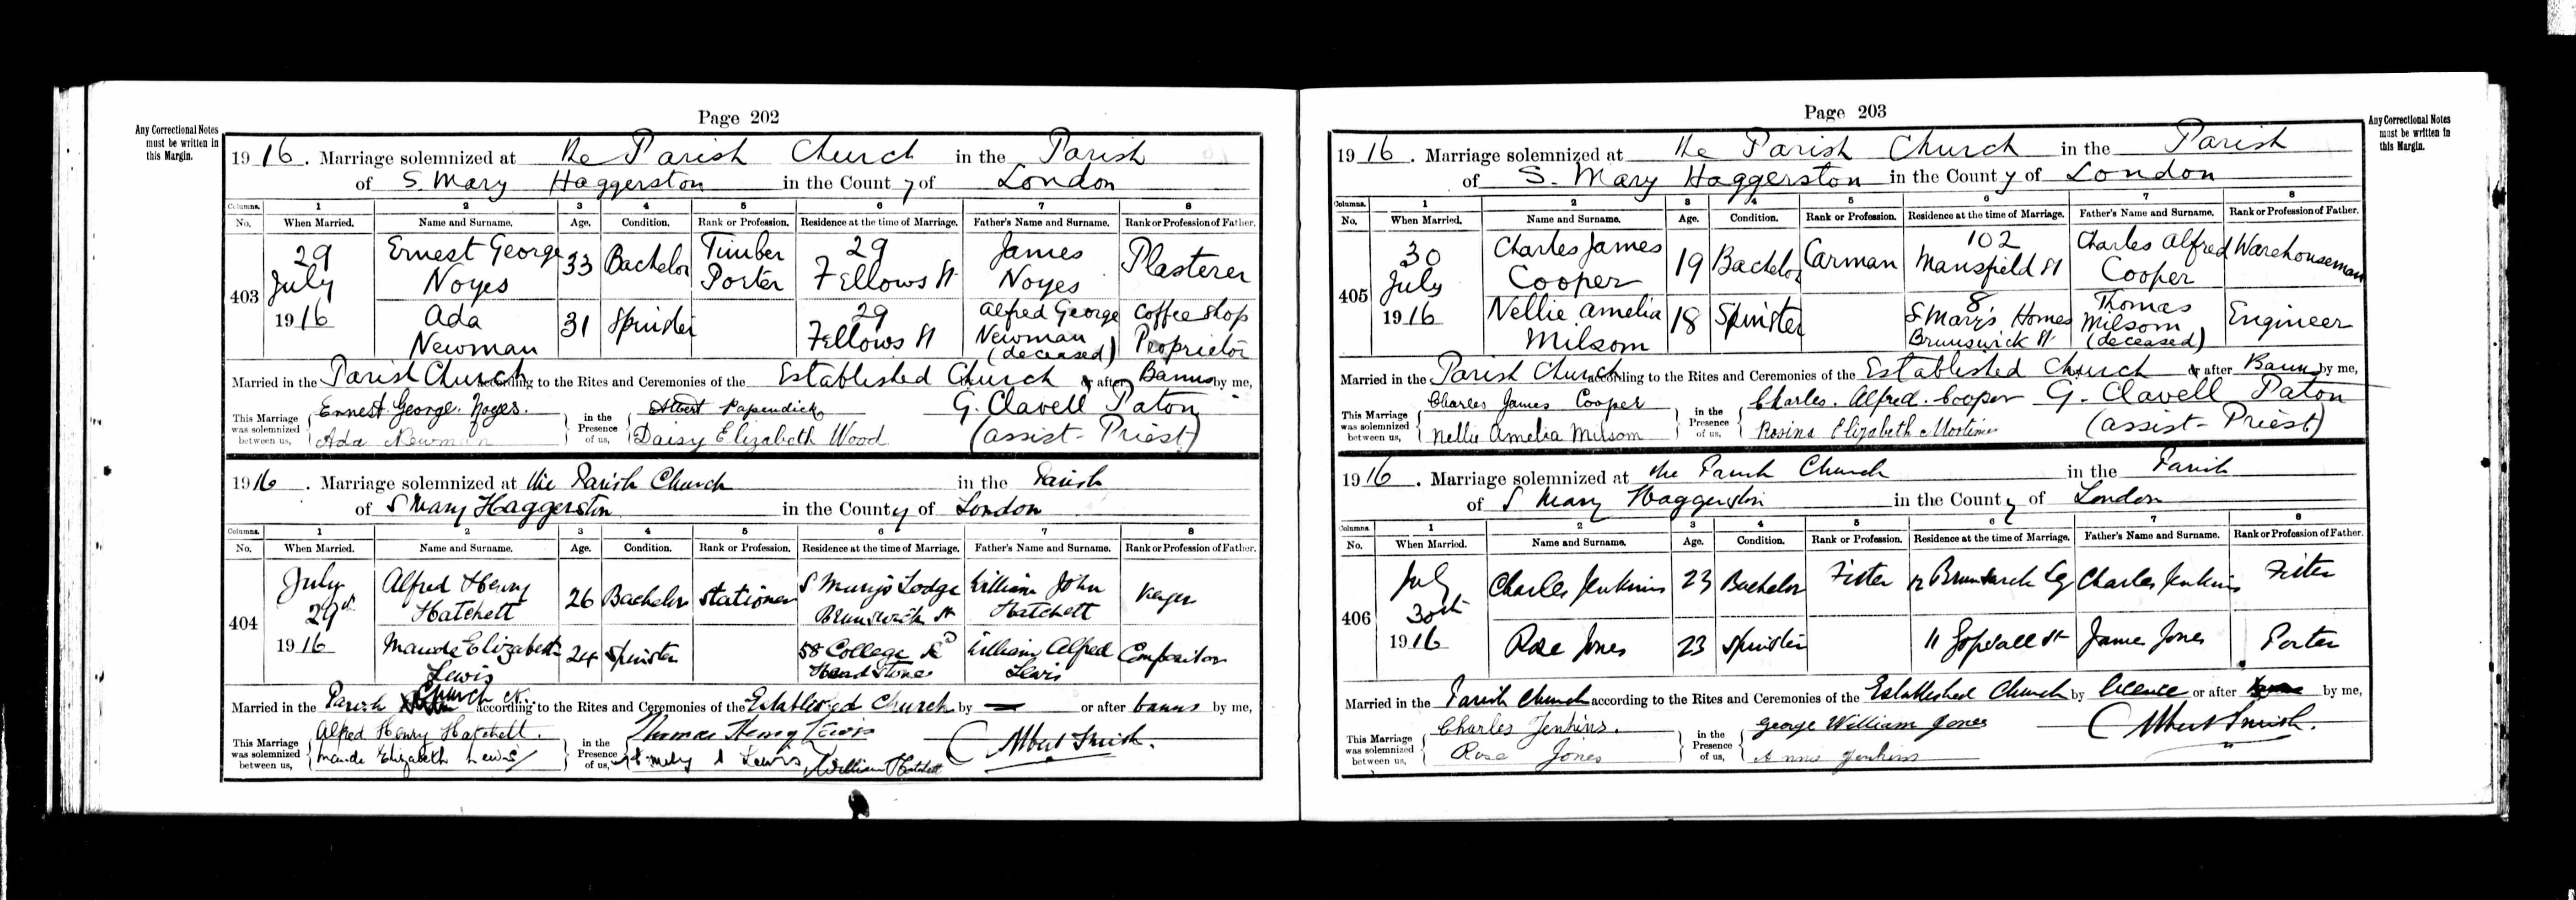 1916 marriage of Ada Newman to Ernest George Noyes